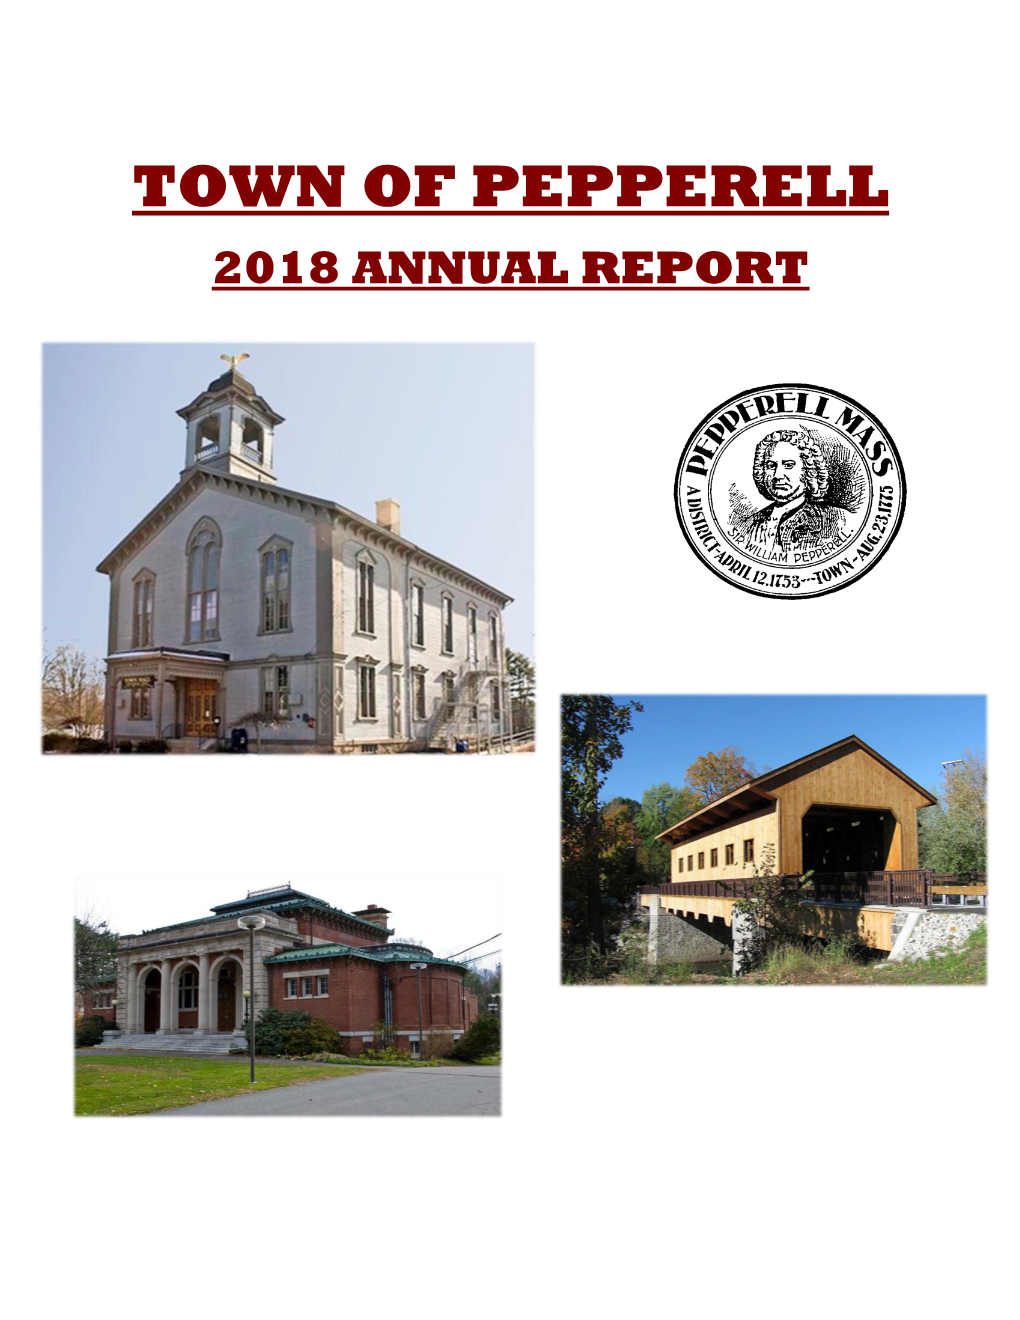 Town of Pepperell 2018 Annual Report